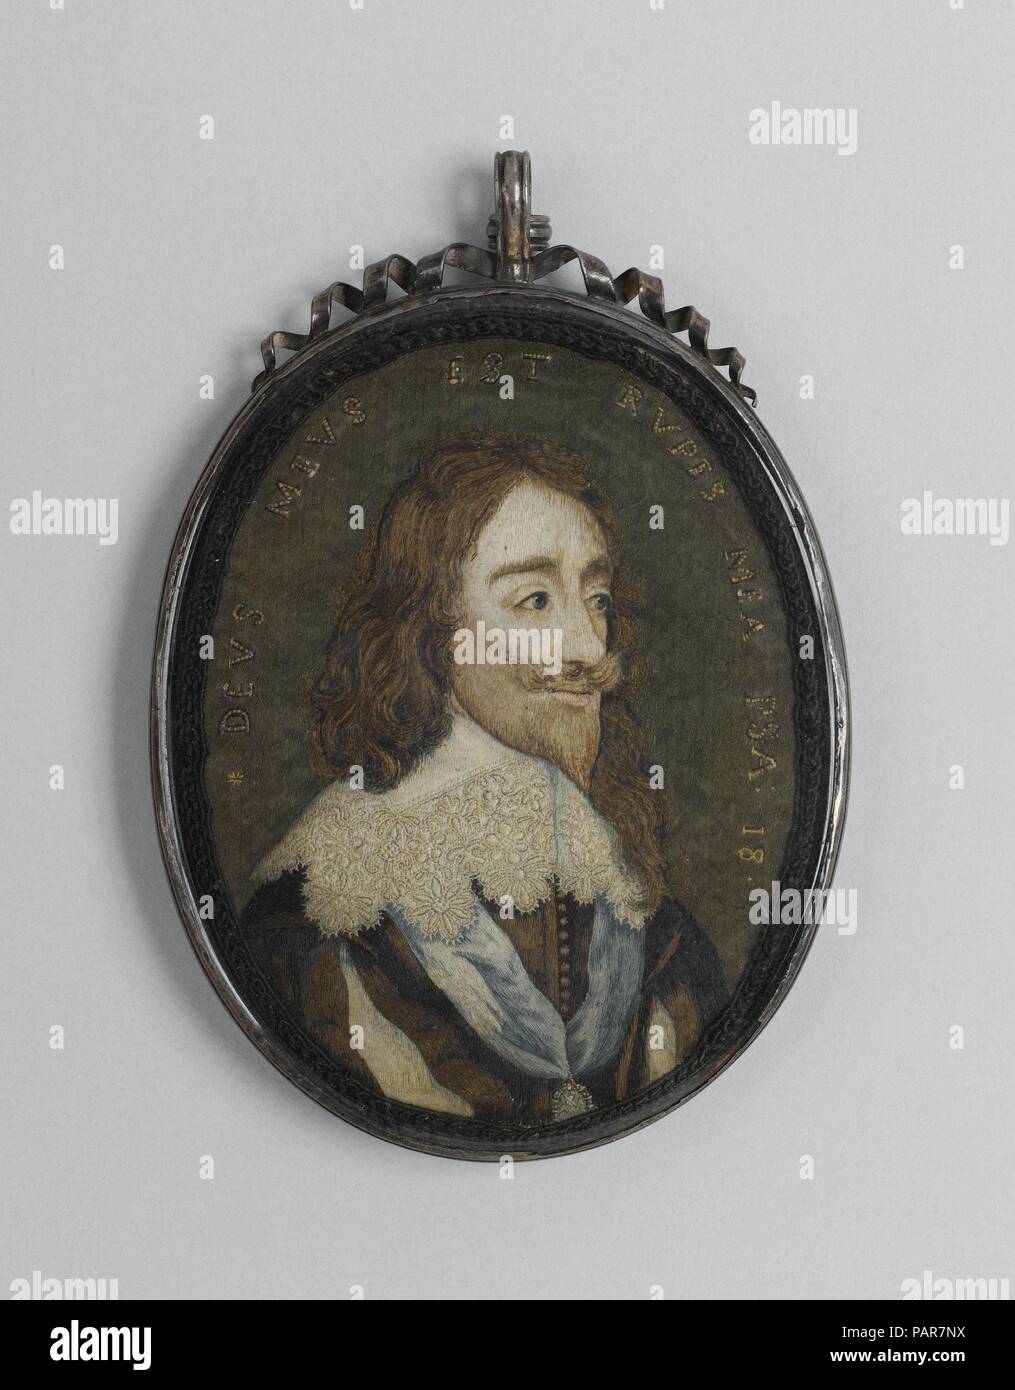 Charles I. Artist: After an engraving of by Wenceslaus Hollar (Bohemian, Prague 1607-1677 London). Culture: British. Dimensions: H. 6 x W. 4 1/2 inches (15.2 x 11.4 cm). Date: 1650-70.  This miniature portrait of Charles I is one of the most technically accomplished examples of professional seventeenth-century needlework. In addition to this miniature, other examples include: two in the Victoria and Albert Museum, one in the Wallace Collection in London, one in Rosenborg Castle in Copenhagen, and one in the collection of John H. Bryan, which is housed in a silver-gilt frame engraved with the r Stock Photo